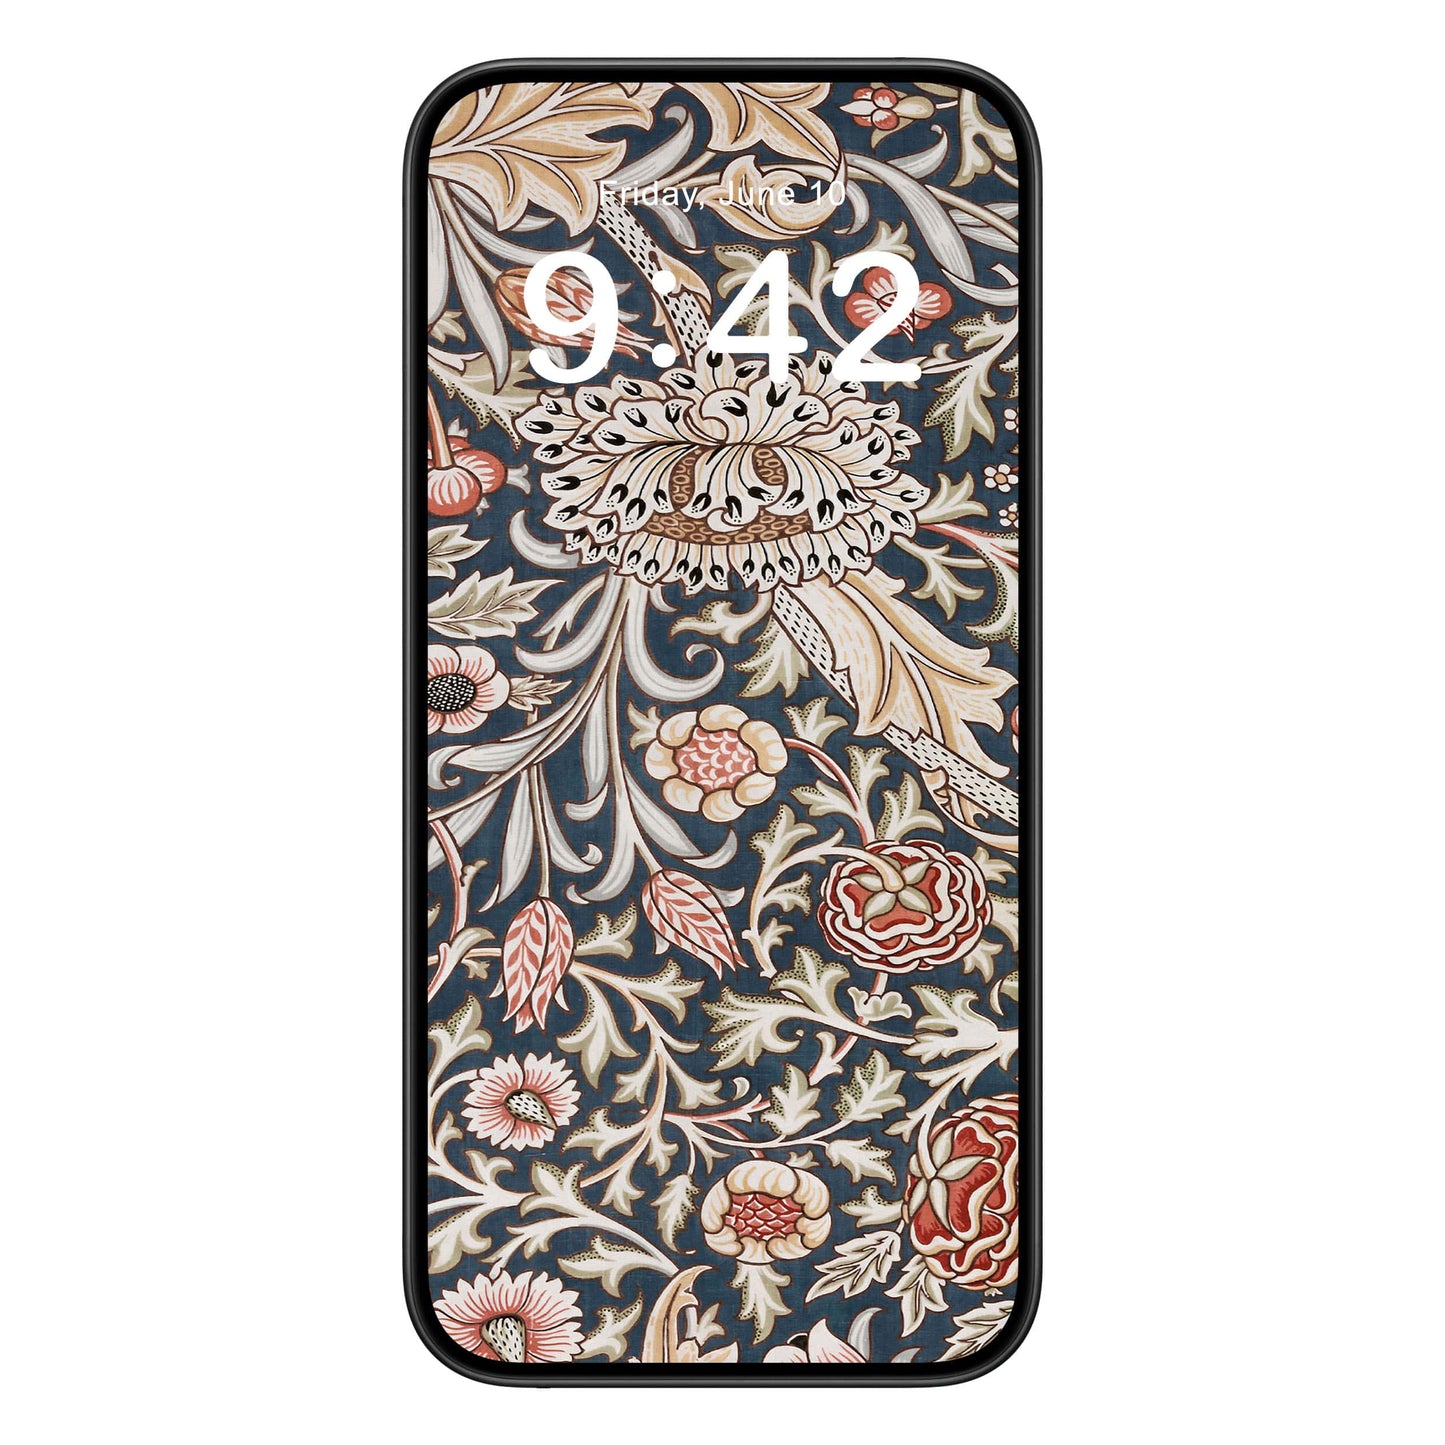 Vintage Wallpaper phone wallpaper background with william morris design shown on a phone lock screen, instant download available.